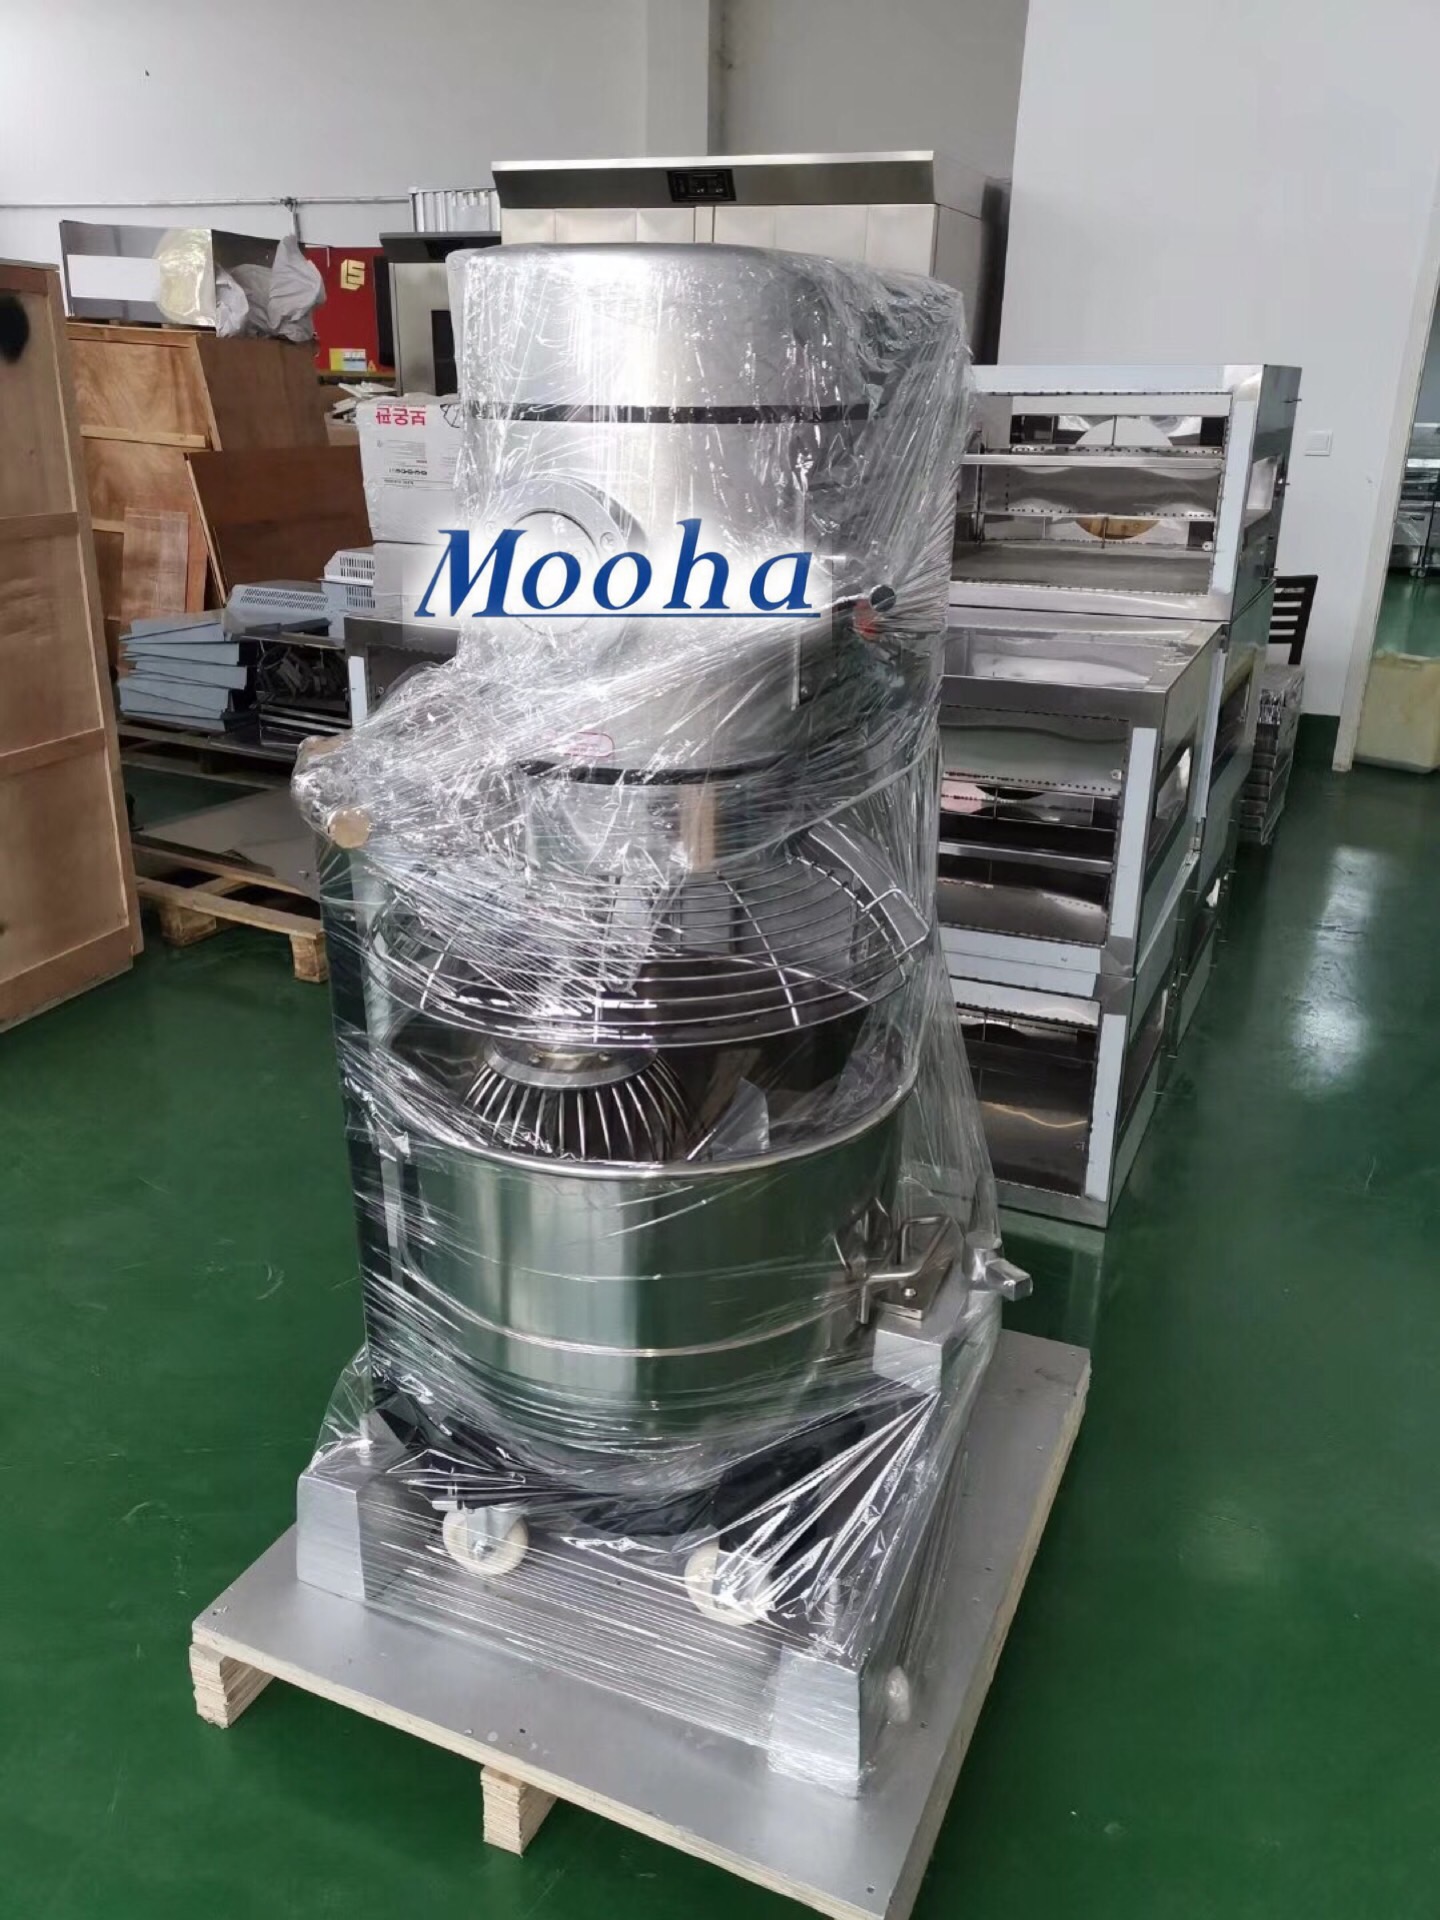 Commercial 80 Liters Planetary Mixer High Quality 8-12 KG powder Kneading Cake Biscuits Cookies Cream Egg Butter Dough Mixing Bakery Machine